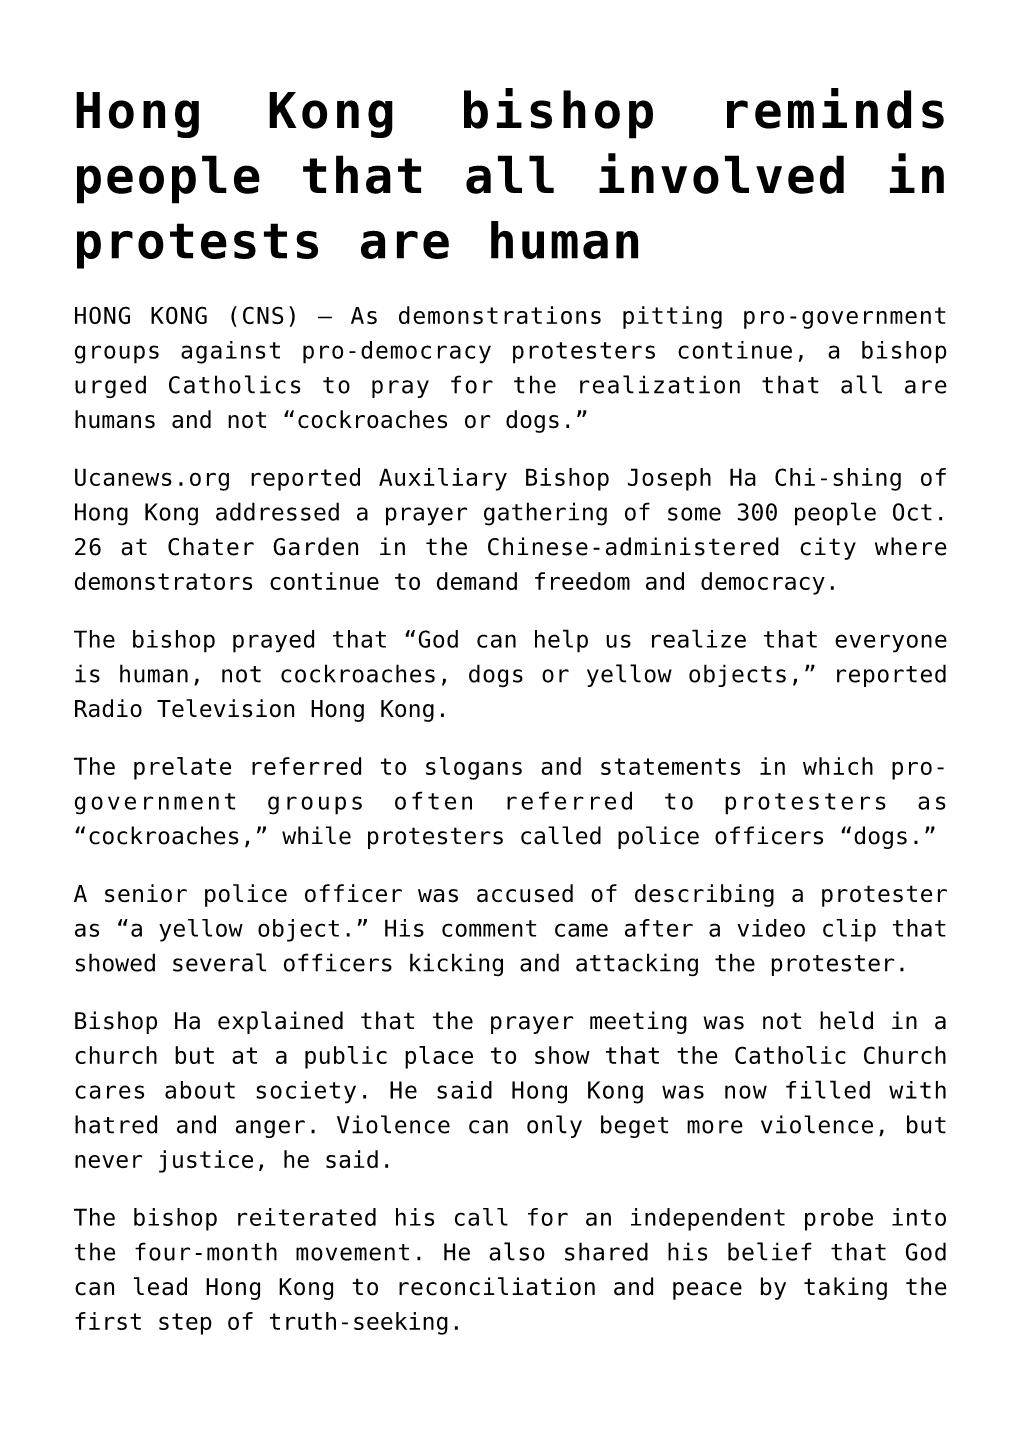 Hong Kong Bishop Reminds People That All Involved in Protests Are Human